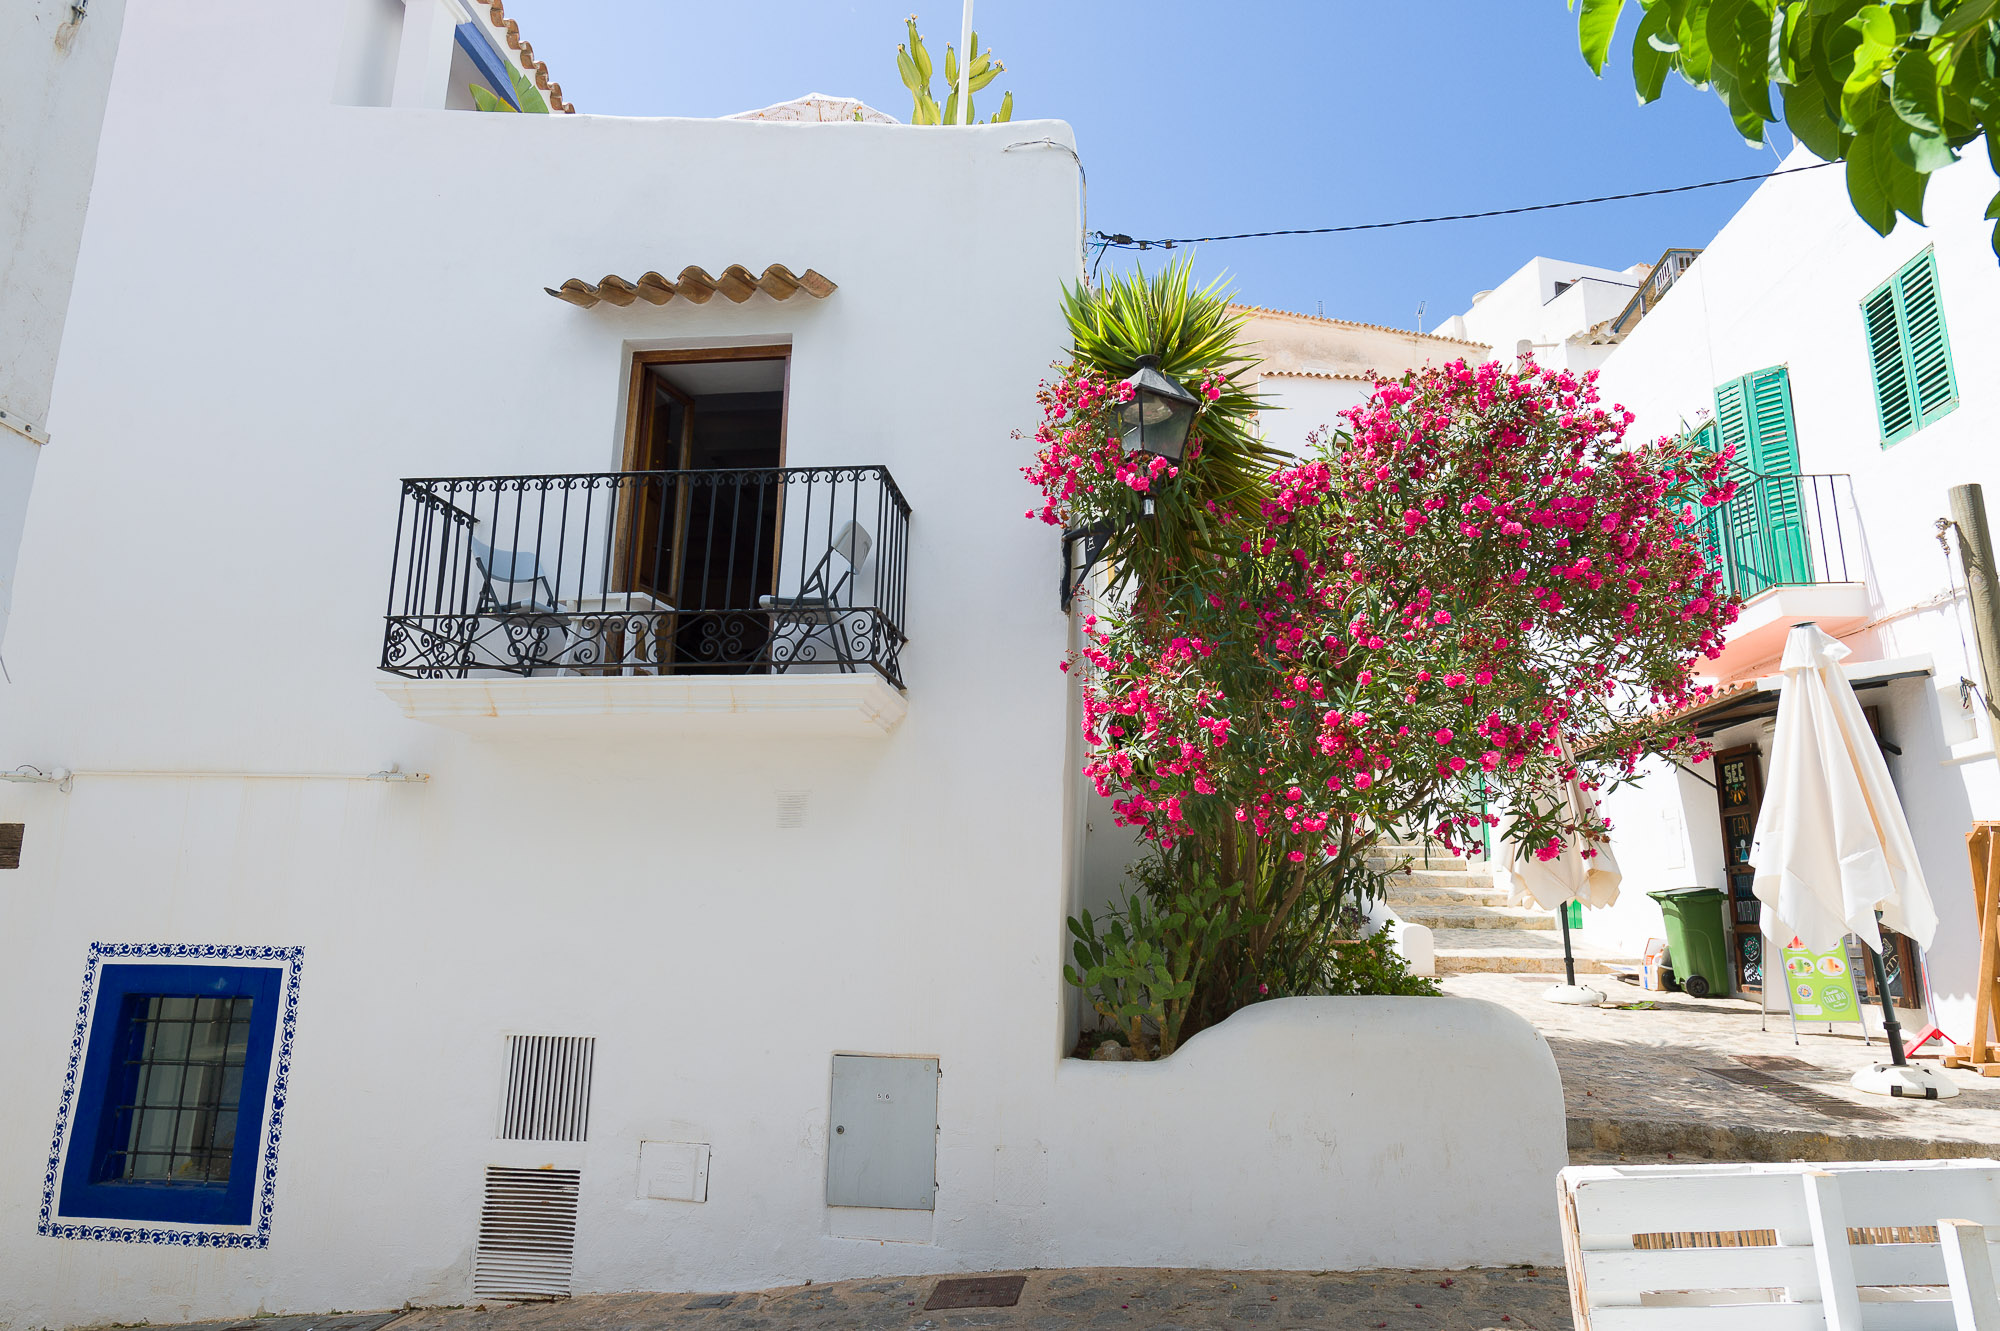 House in the old town from Ibiza